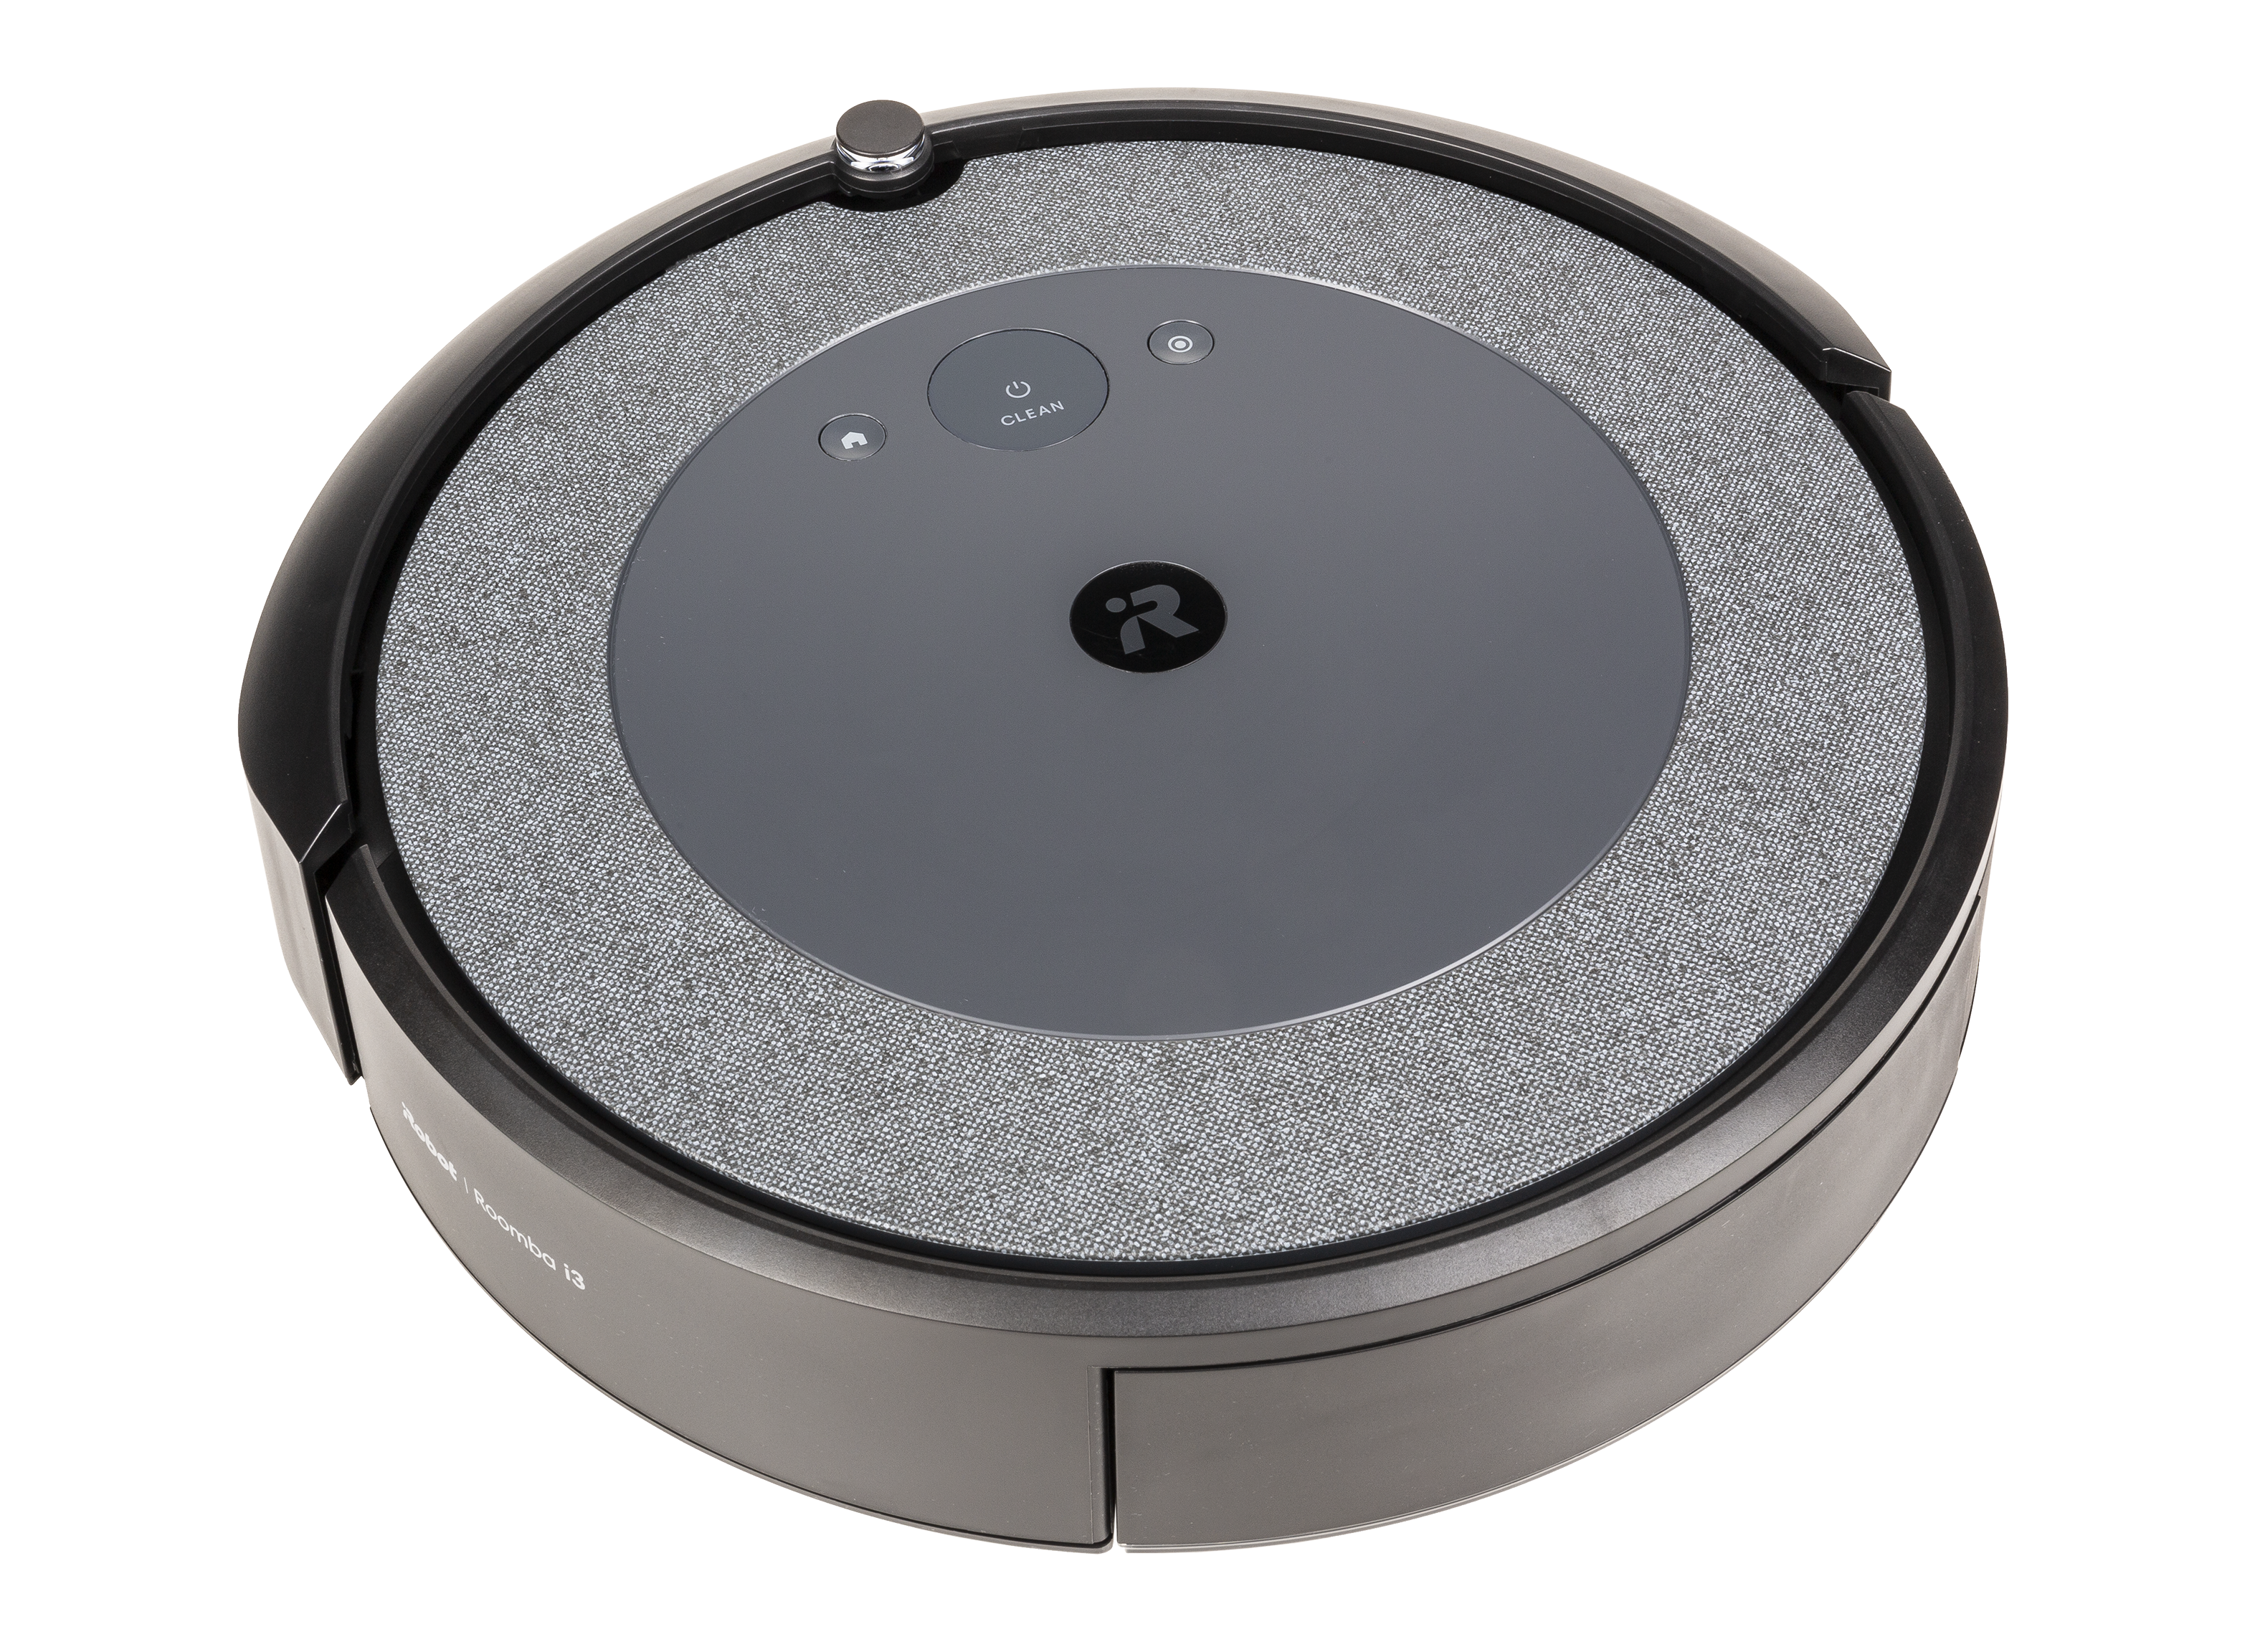 https://crdms.images.consumerreports.org/prod/products/cr/models/406079-robotic-vacuums-irobot-roomba-i3-evo-10029151.png